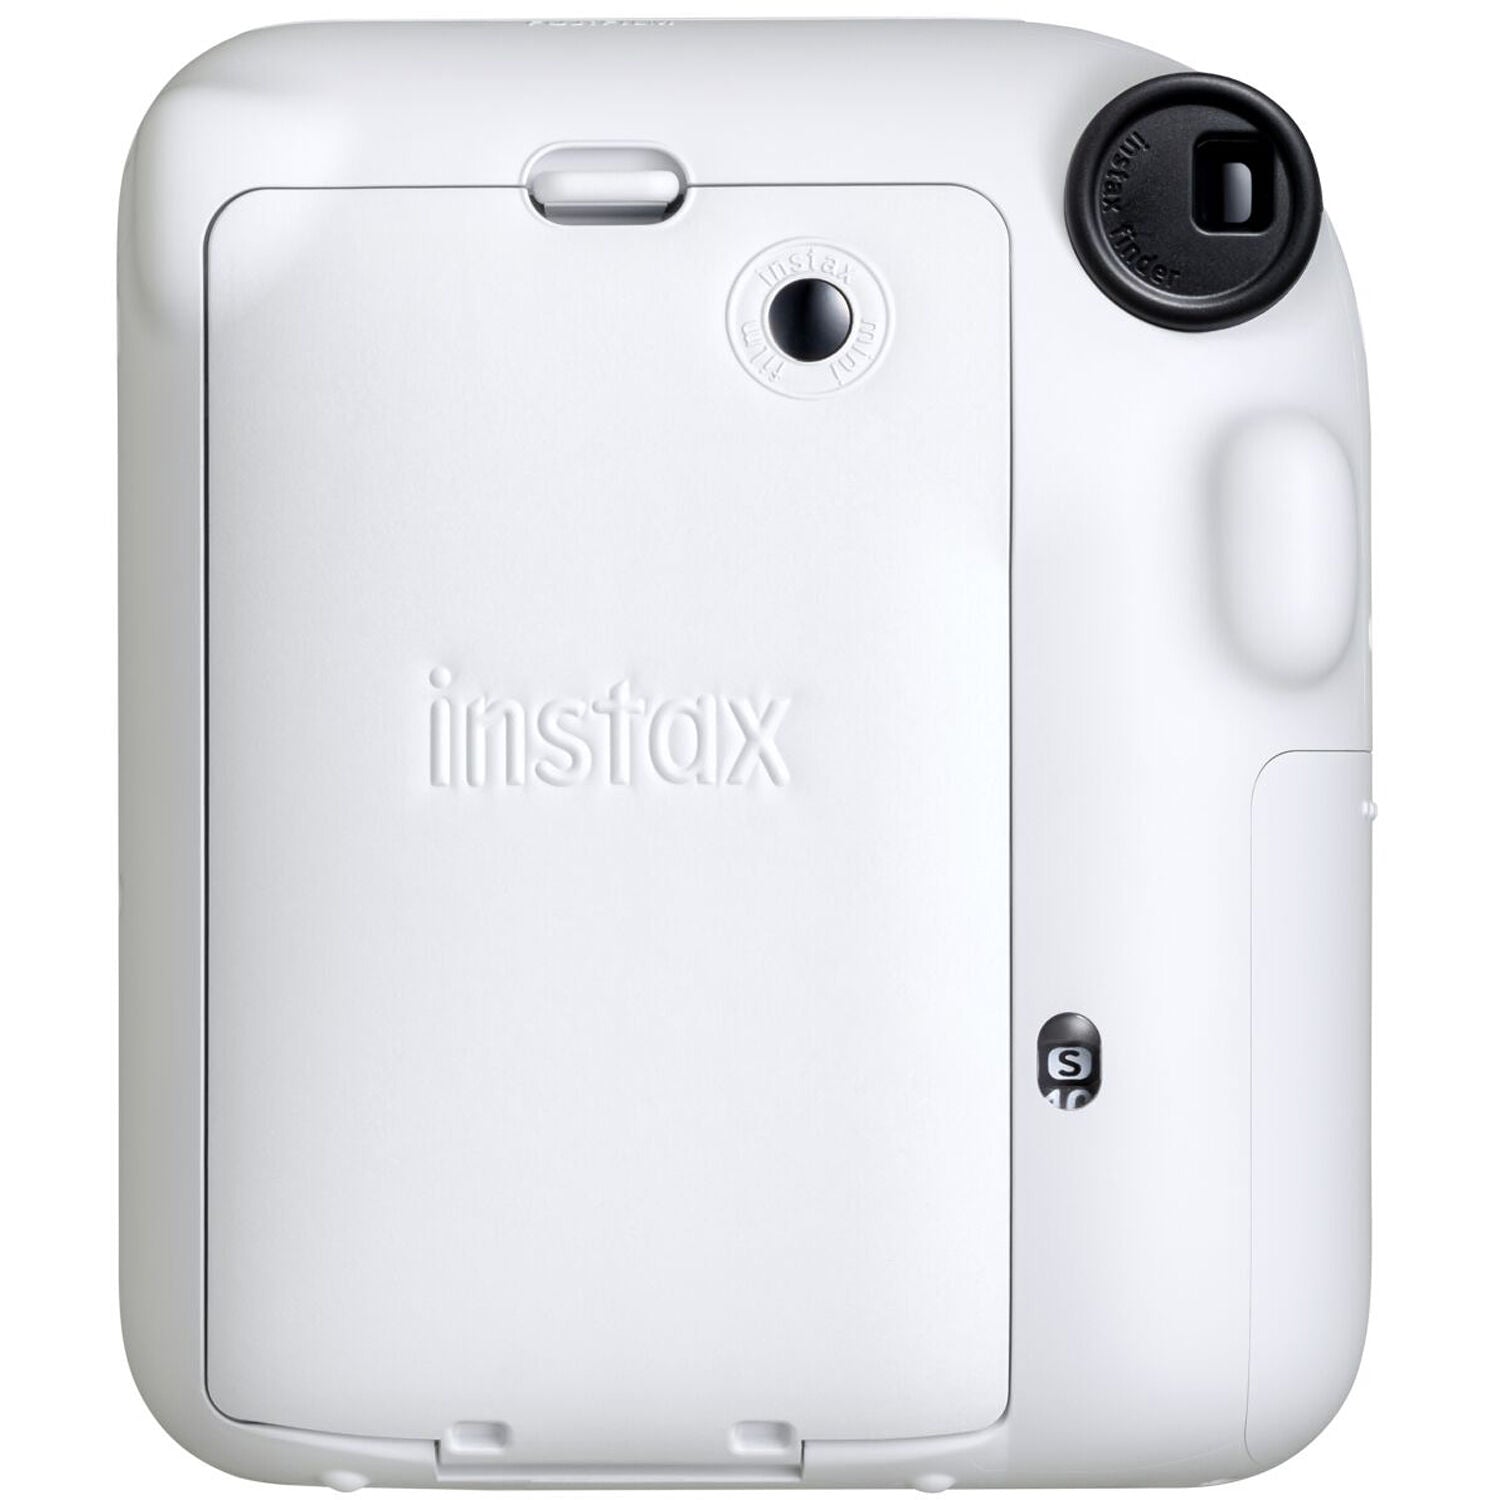 FUJIFILM INSTAX Mini 12 Instant Film Camera with 10X1 Pack of Instant Film With Red Pouch Kit (Clay White, 10 Exposures)